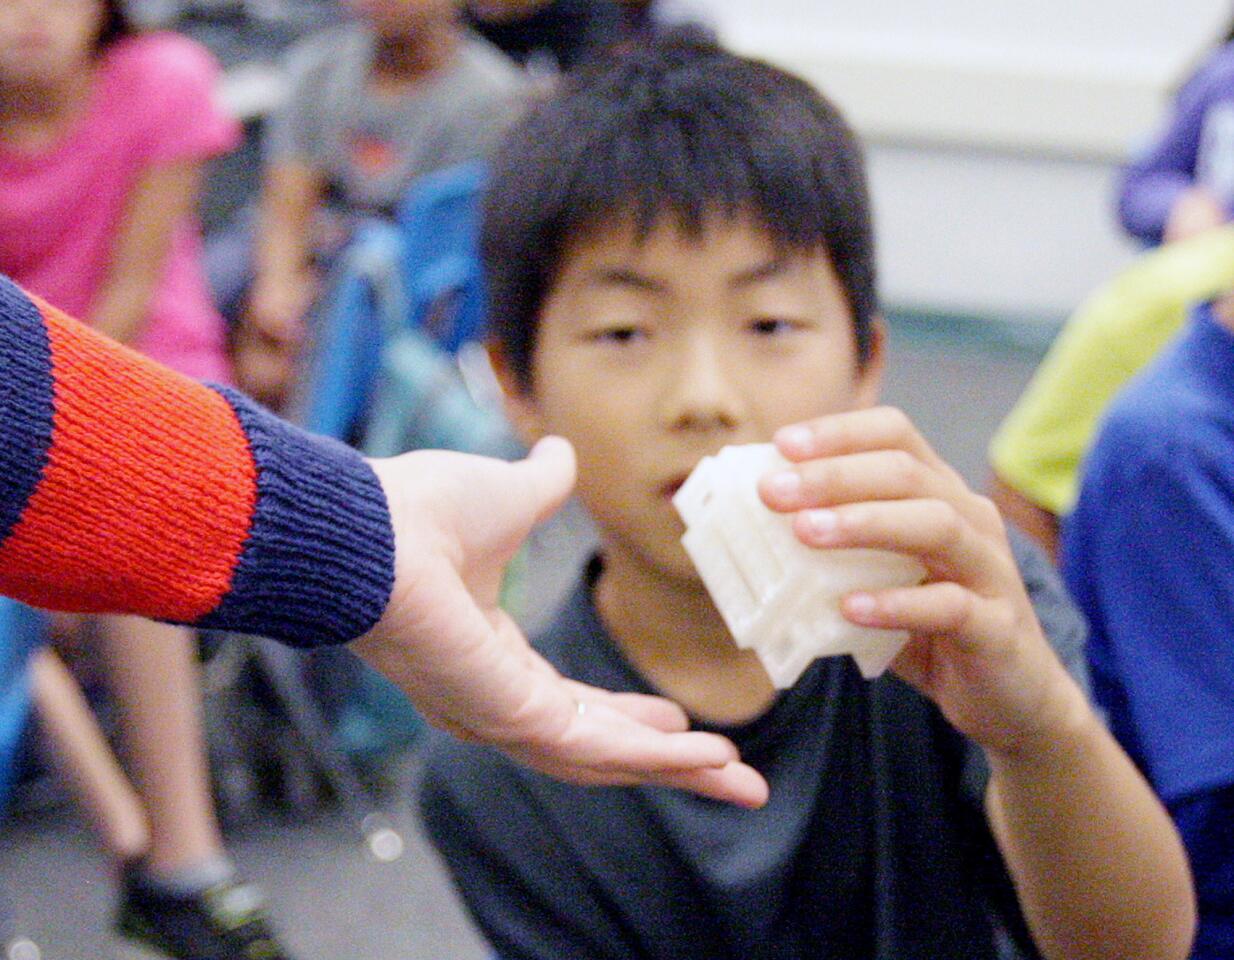 Photo Gallery: 3D printing class at Palm Crest Elementary School